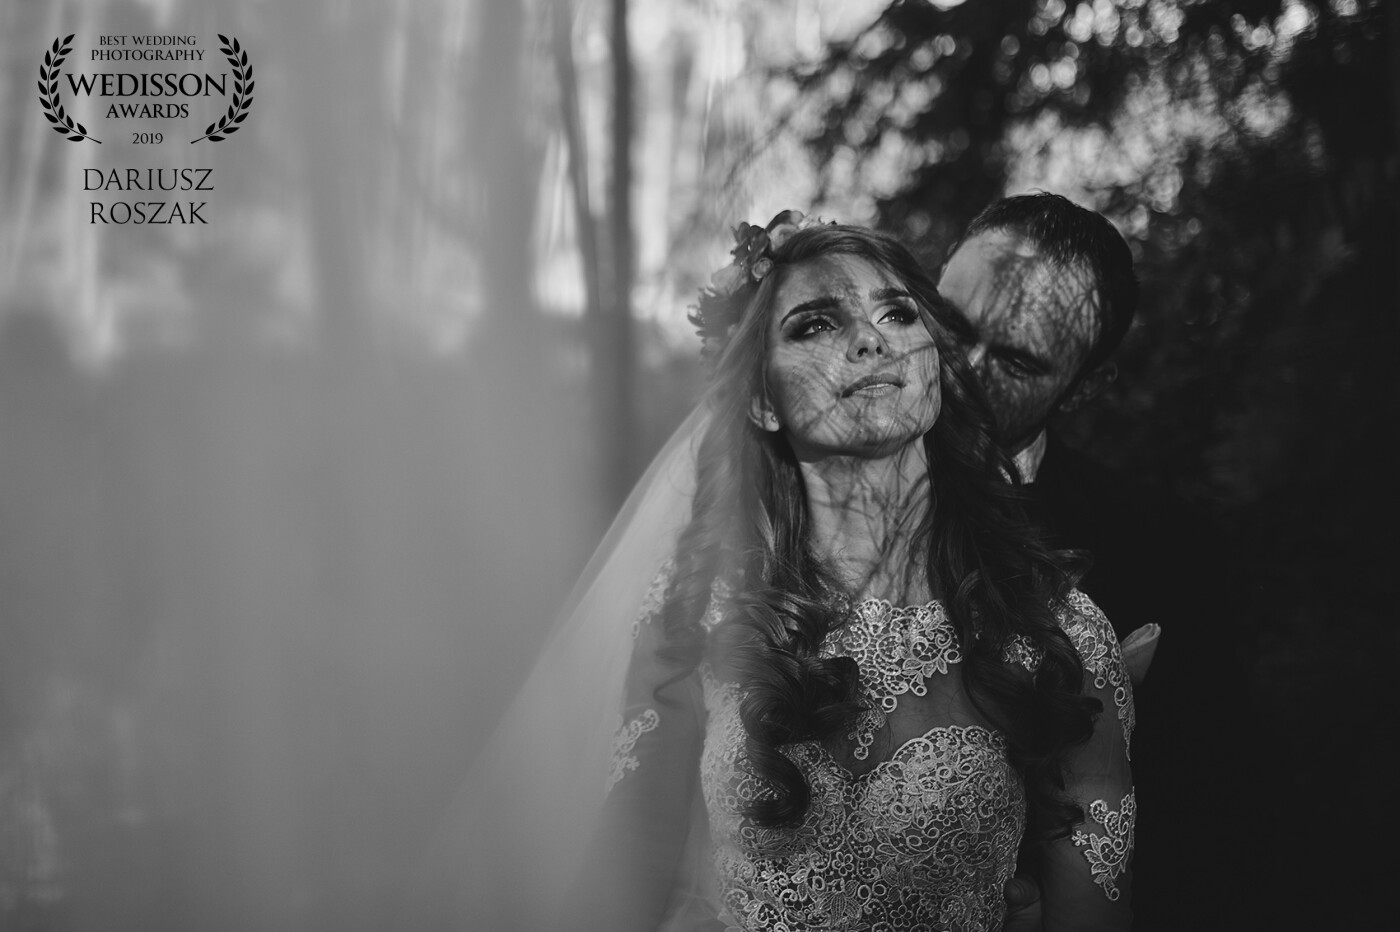 The photo was taken in a forest in Masuria (Poland). The amazing bride greatly facilitated the task of making a nice photo. The gentle sun that shone on the face through the branches probably did a nice job ;)